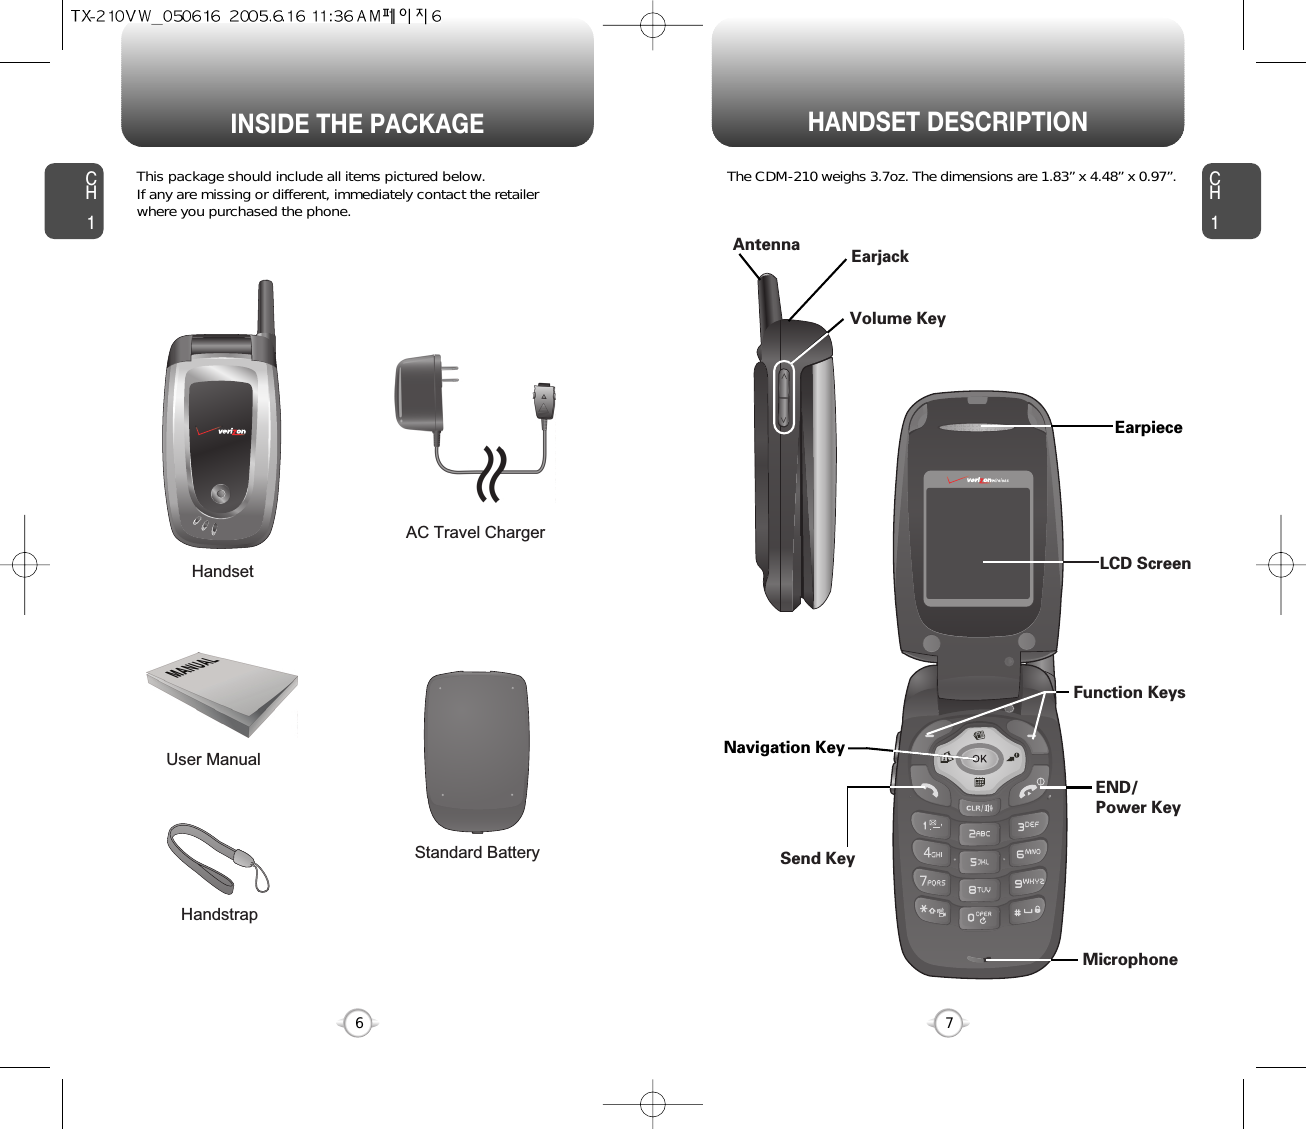 HANDSET DESCRIPTIONCH1This package should include all items pictured below. If any are missing or different, immediately contact the retailer where you purchased the phone.7INSIDE THE PACKAGECH16The CDM-210 weighs 3.7oz. The dimensions are 1.83” x 4.48” x 0.97”.HandstrapUser ManualAC Travel ChargerHandsetStandard BatteryAntenna EarjackVolume KeyLCD ScreenFunction KeysSend KeyEND/Power KeyMicrophoneEarpieceNavigation Key